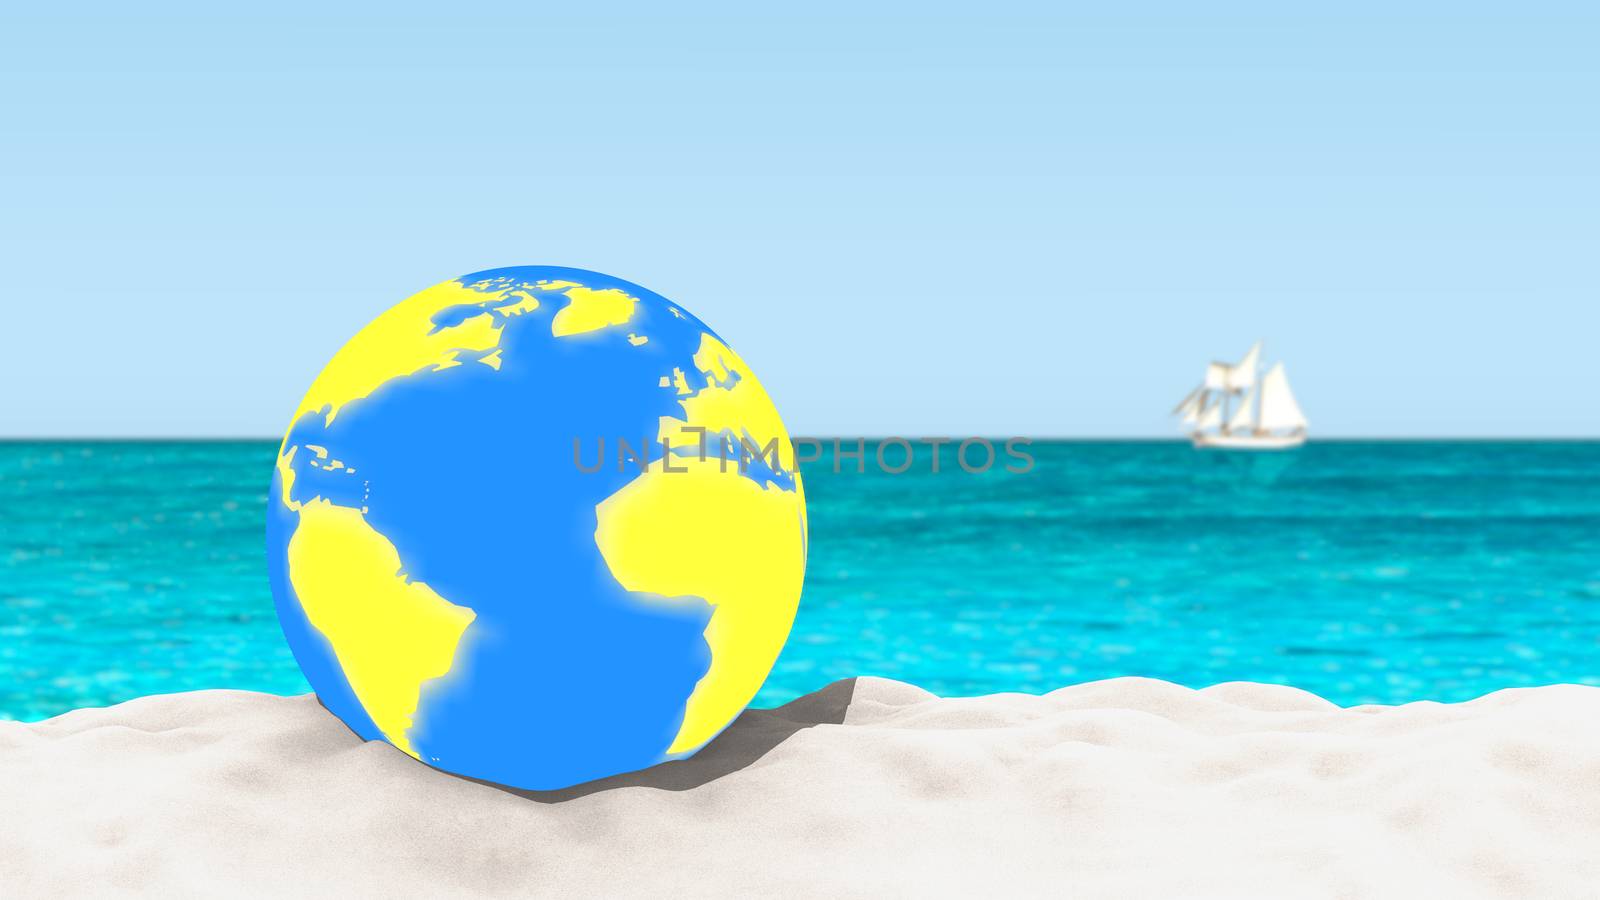 Ball with a world map pattern on a sandy beach with a blurred background. by ytjo